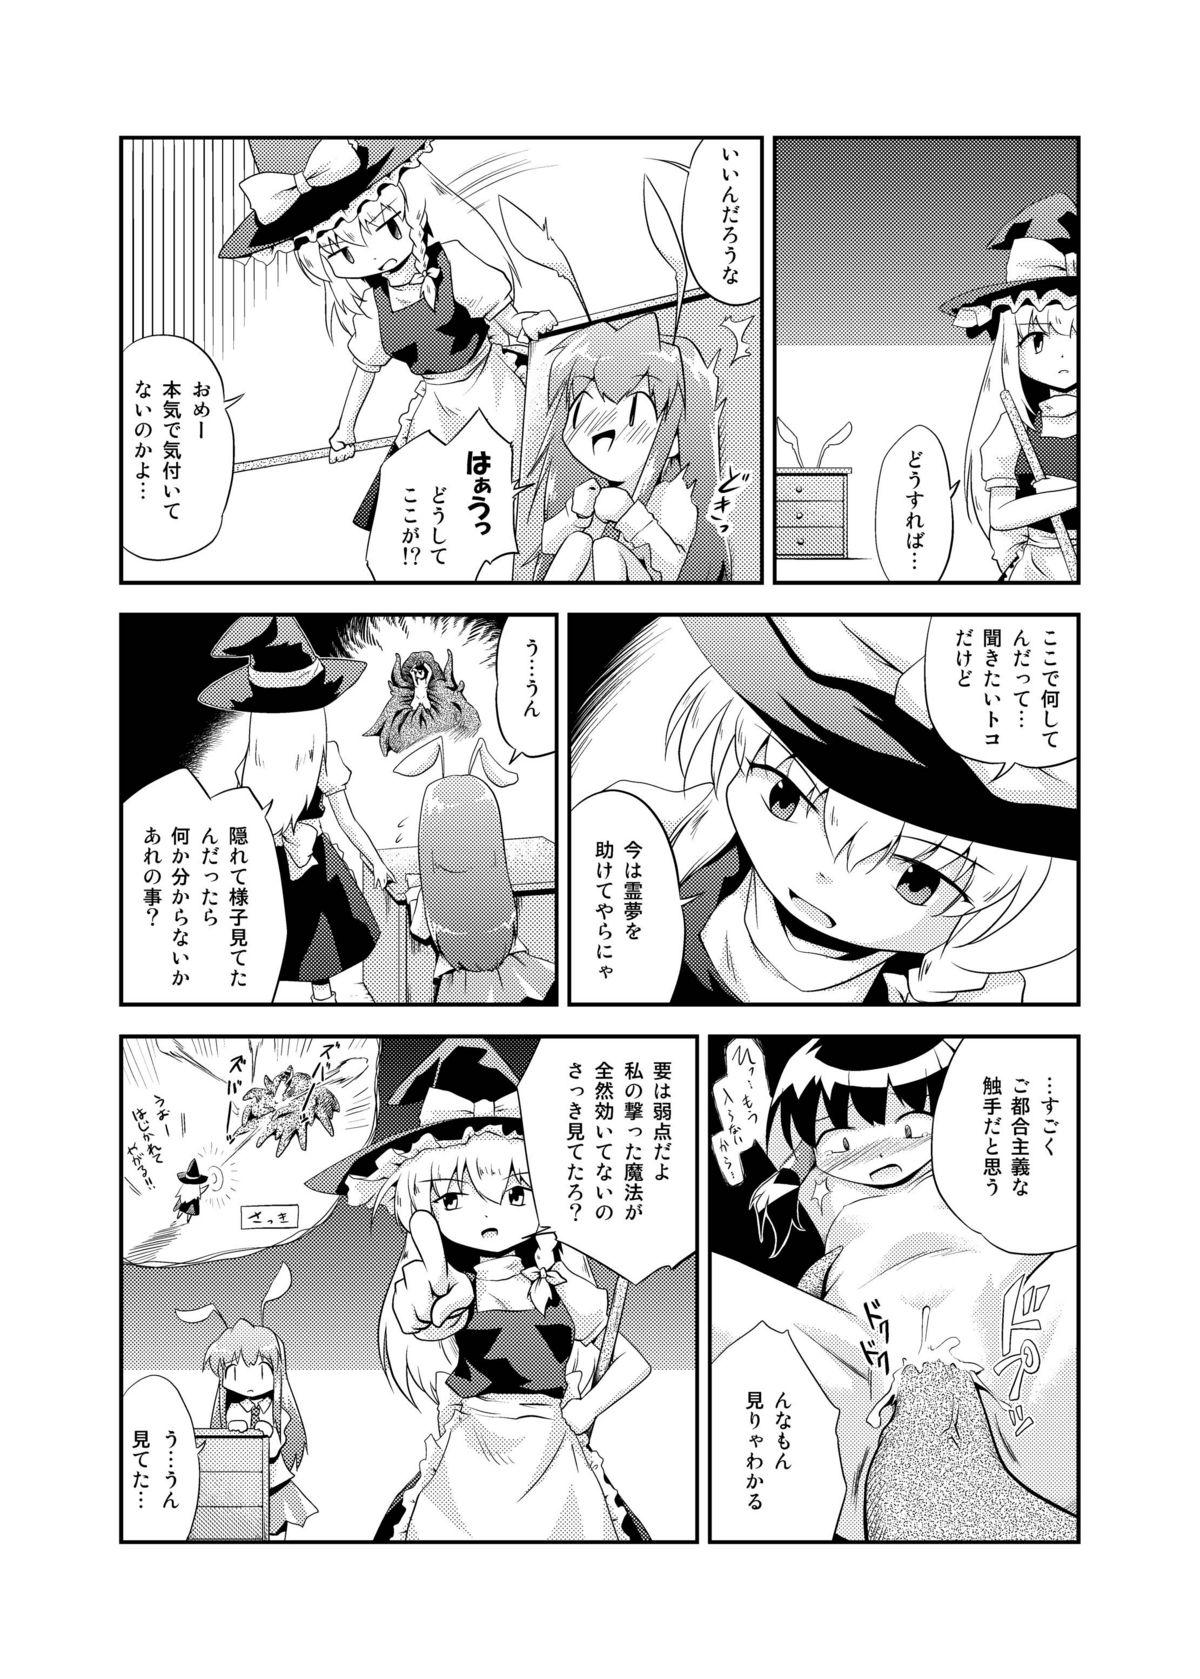 Jerking DISARM CLOTHES - Touhou project 18 Porn - Page 4